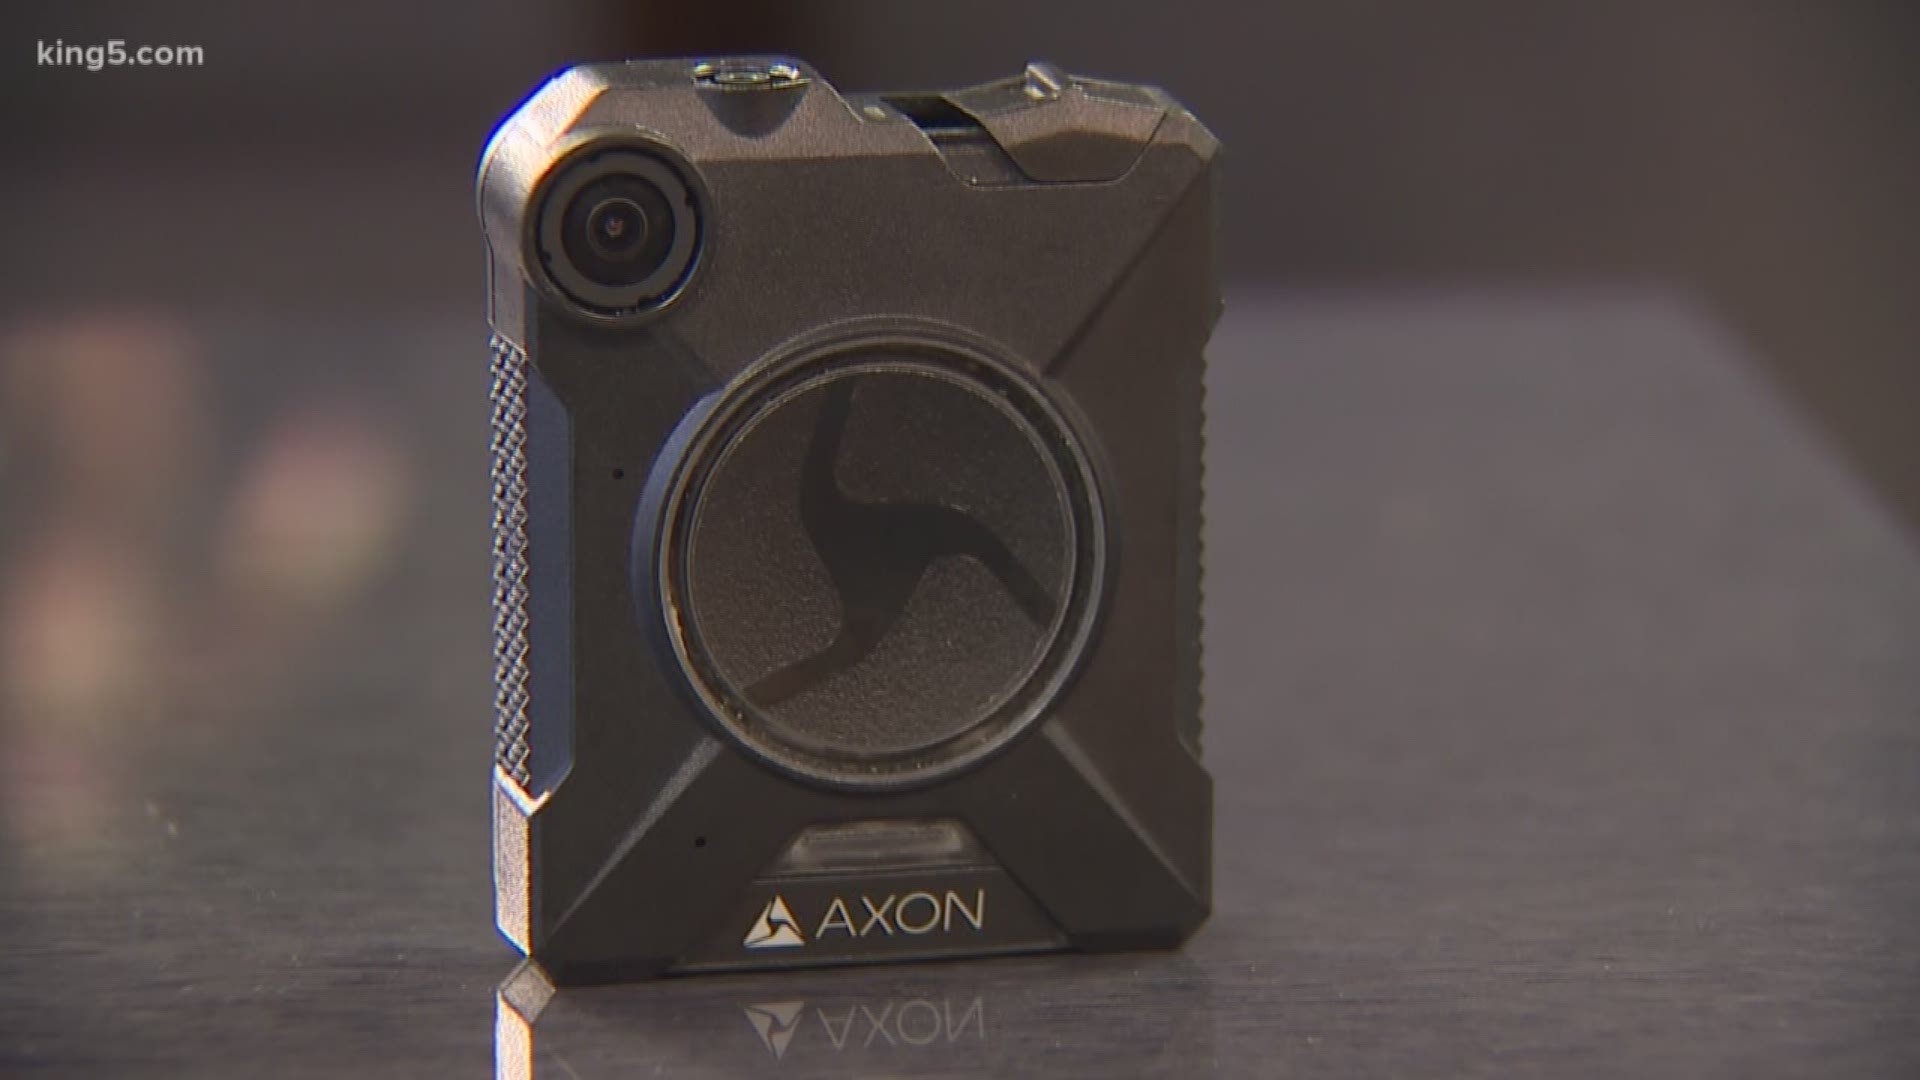 Over 100 Kent officers will be wearing the new body cameras, funded by revenue from red light traffic cameras.